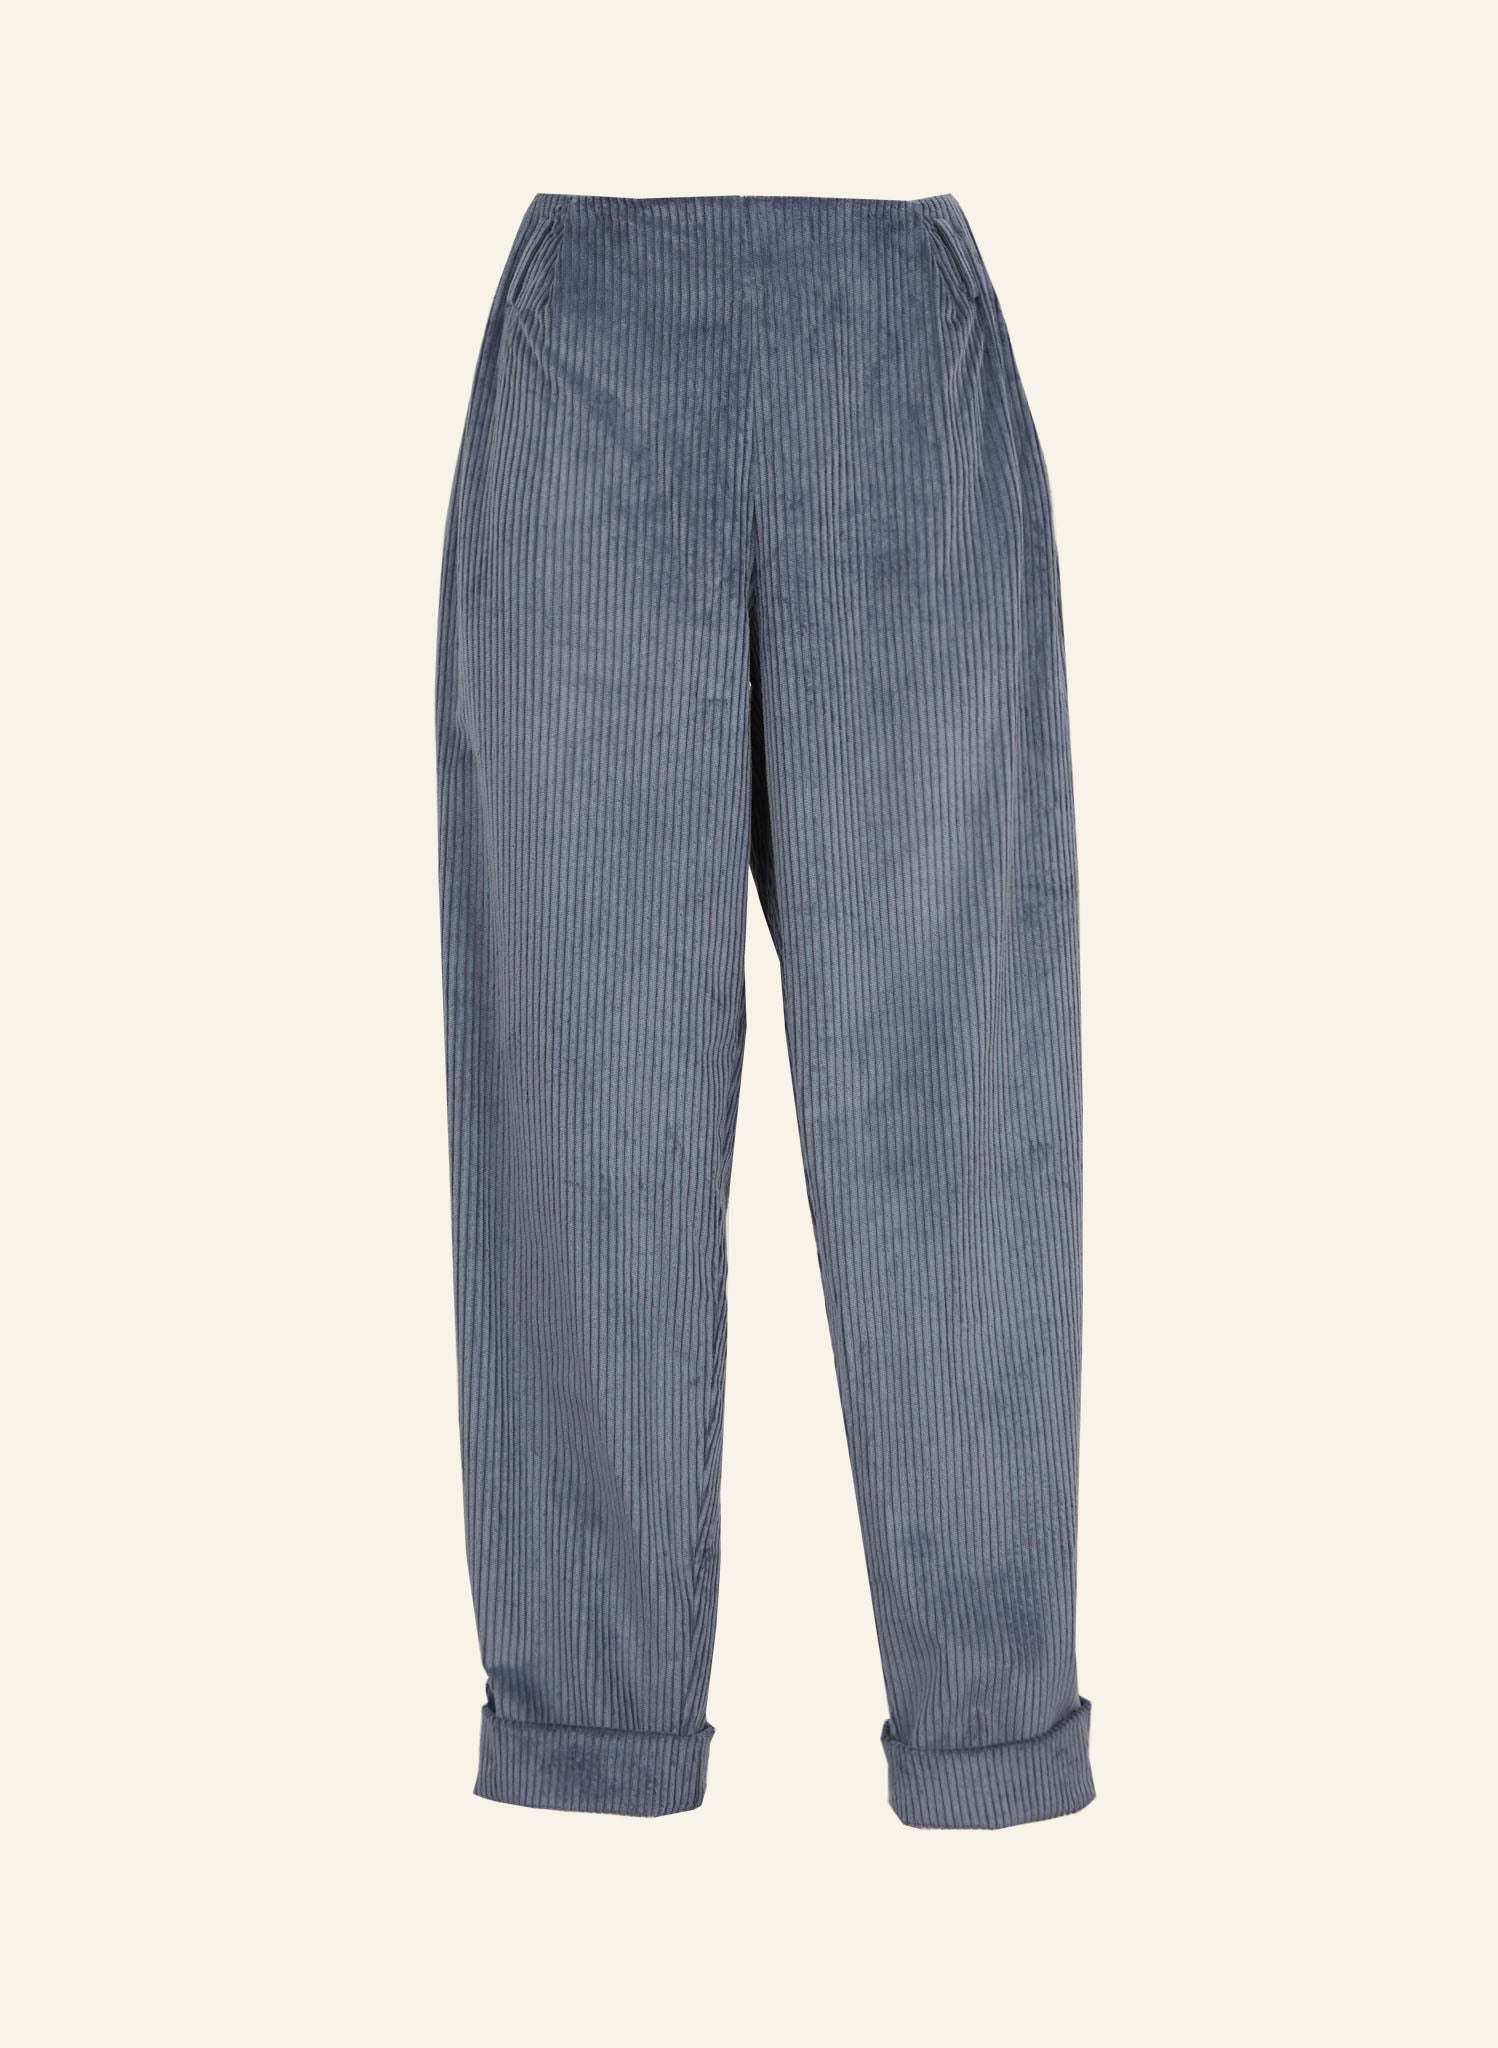 Corduroy trousers - Blue - Kids | H&M IN